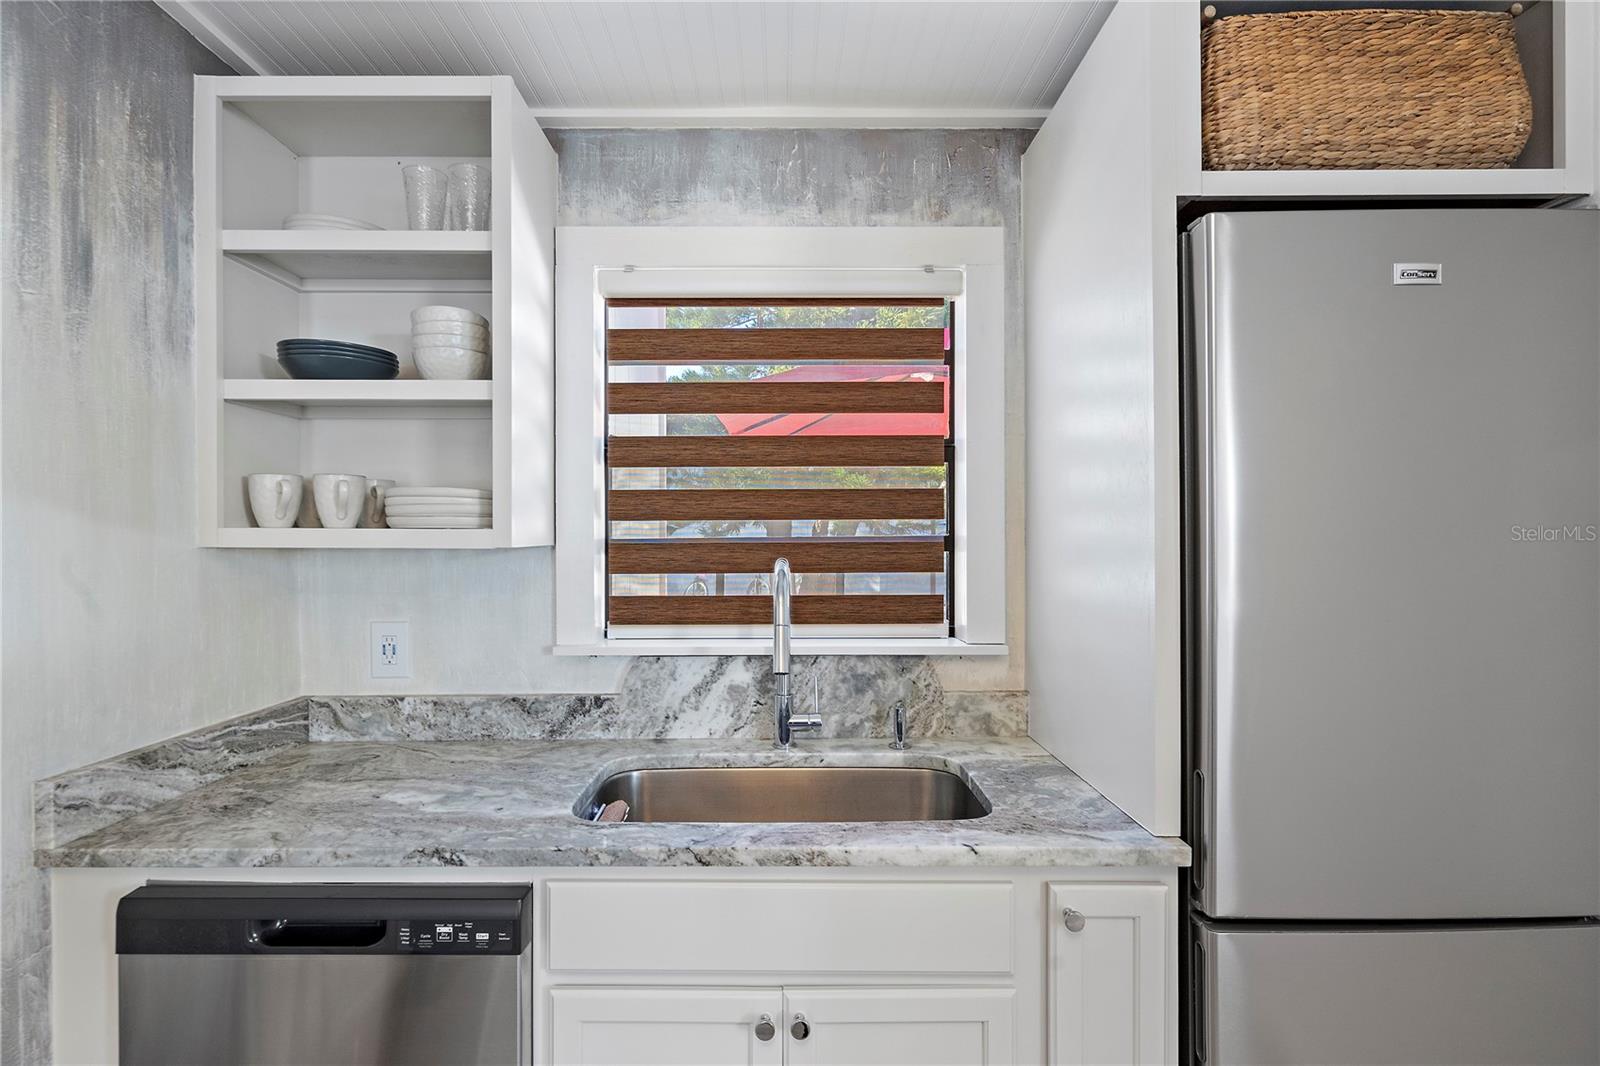 No detail has been overlooked, including Custom Painted wallpaper in the kitchen.